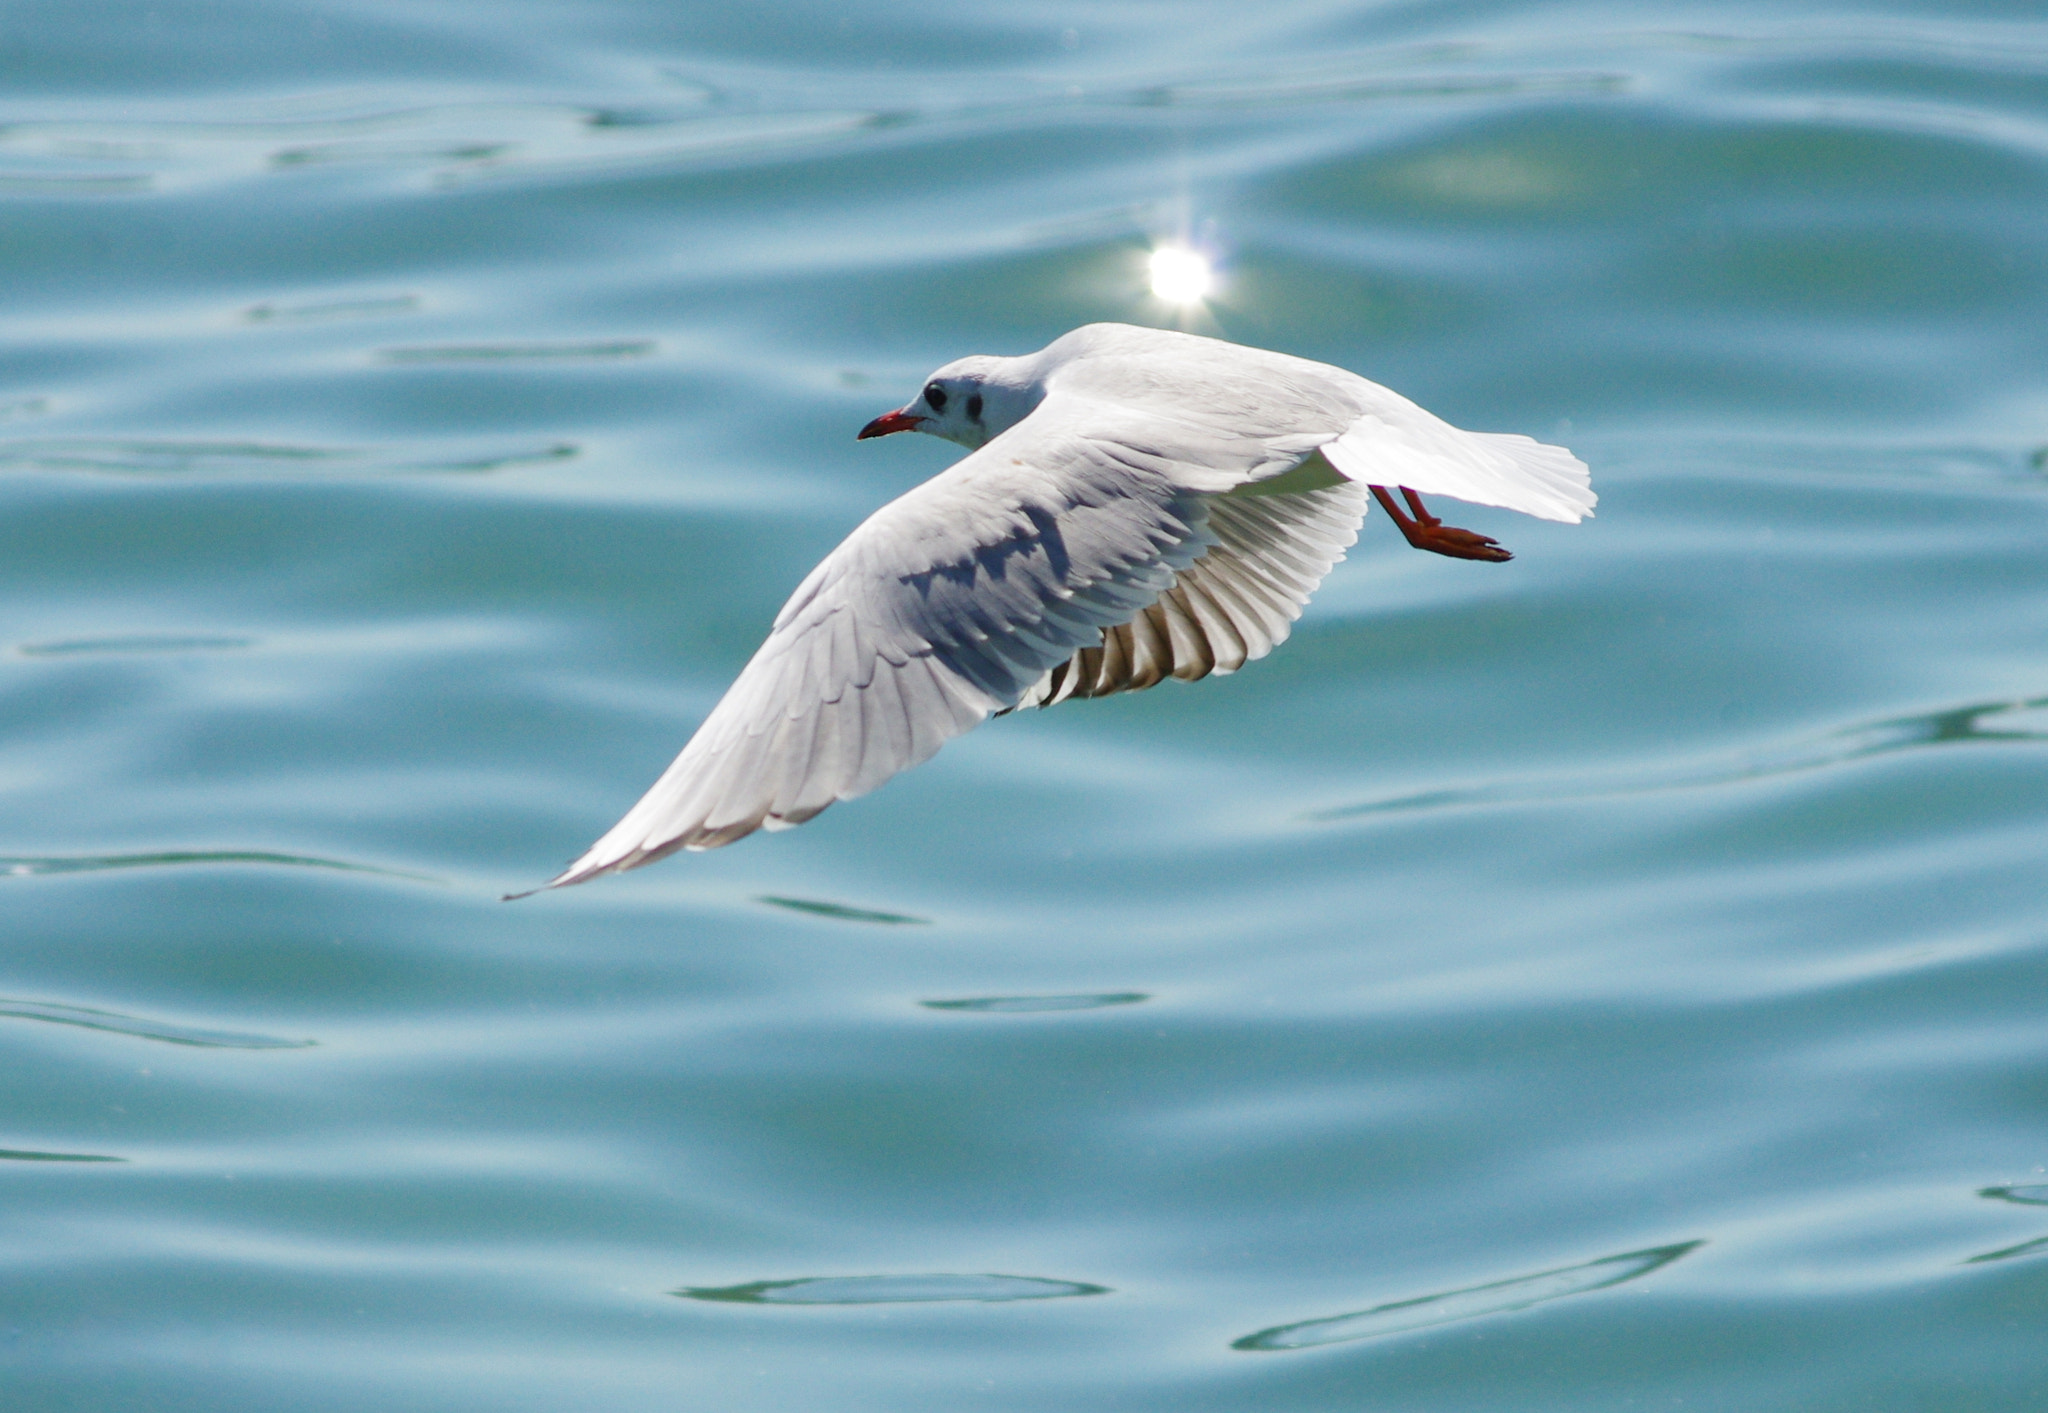 Pentax K-5 sample photo. Flight of a seagull - lake constance photography